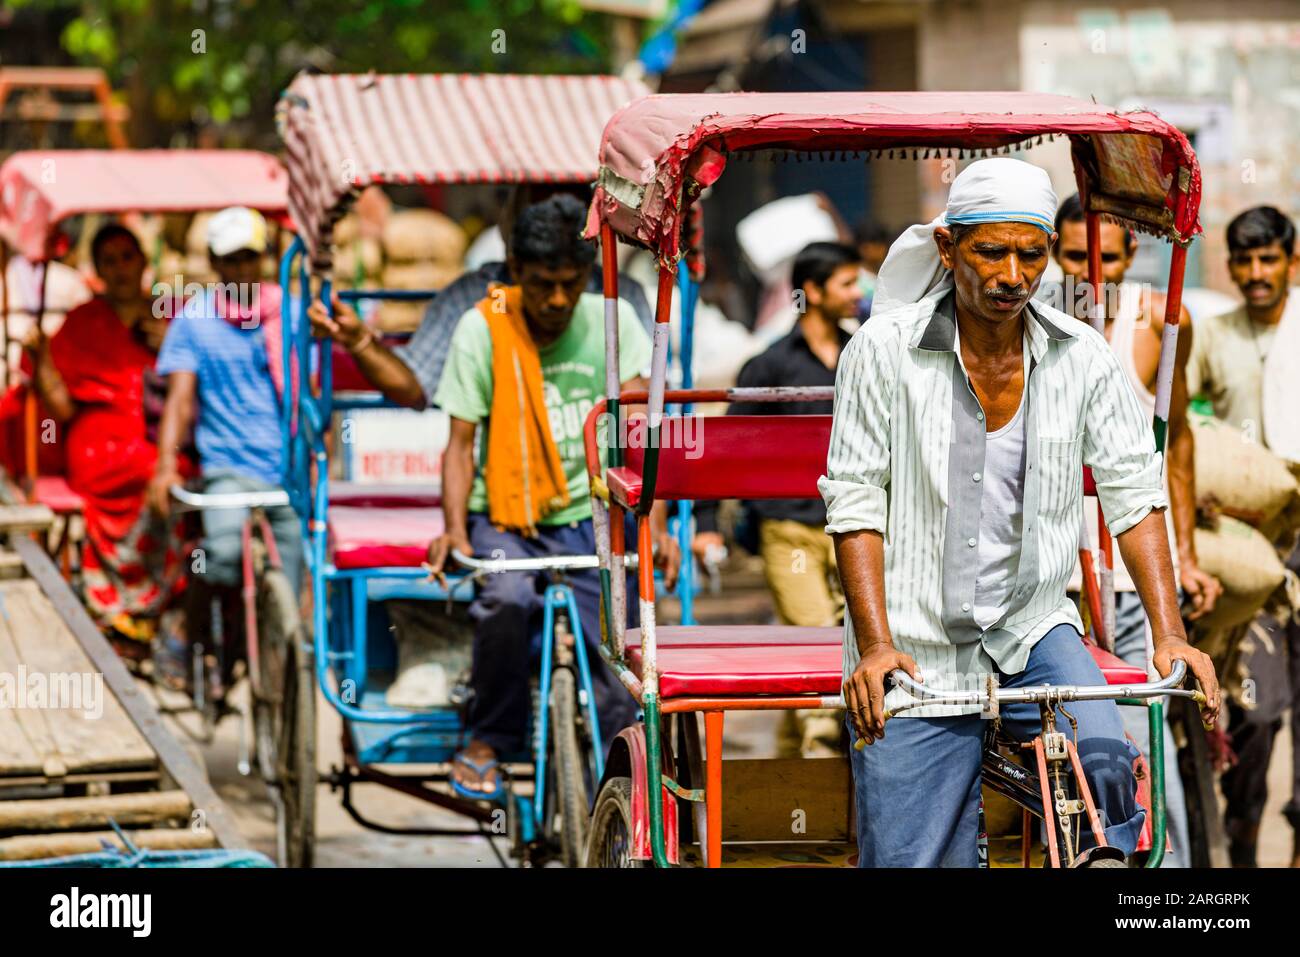 Cycle rickshaws queuing up in the crowded traffic on Khari Baoli Road in Old Delhi Stock Photo